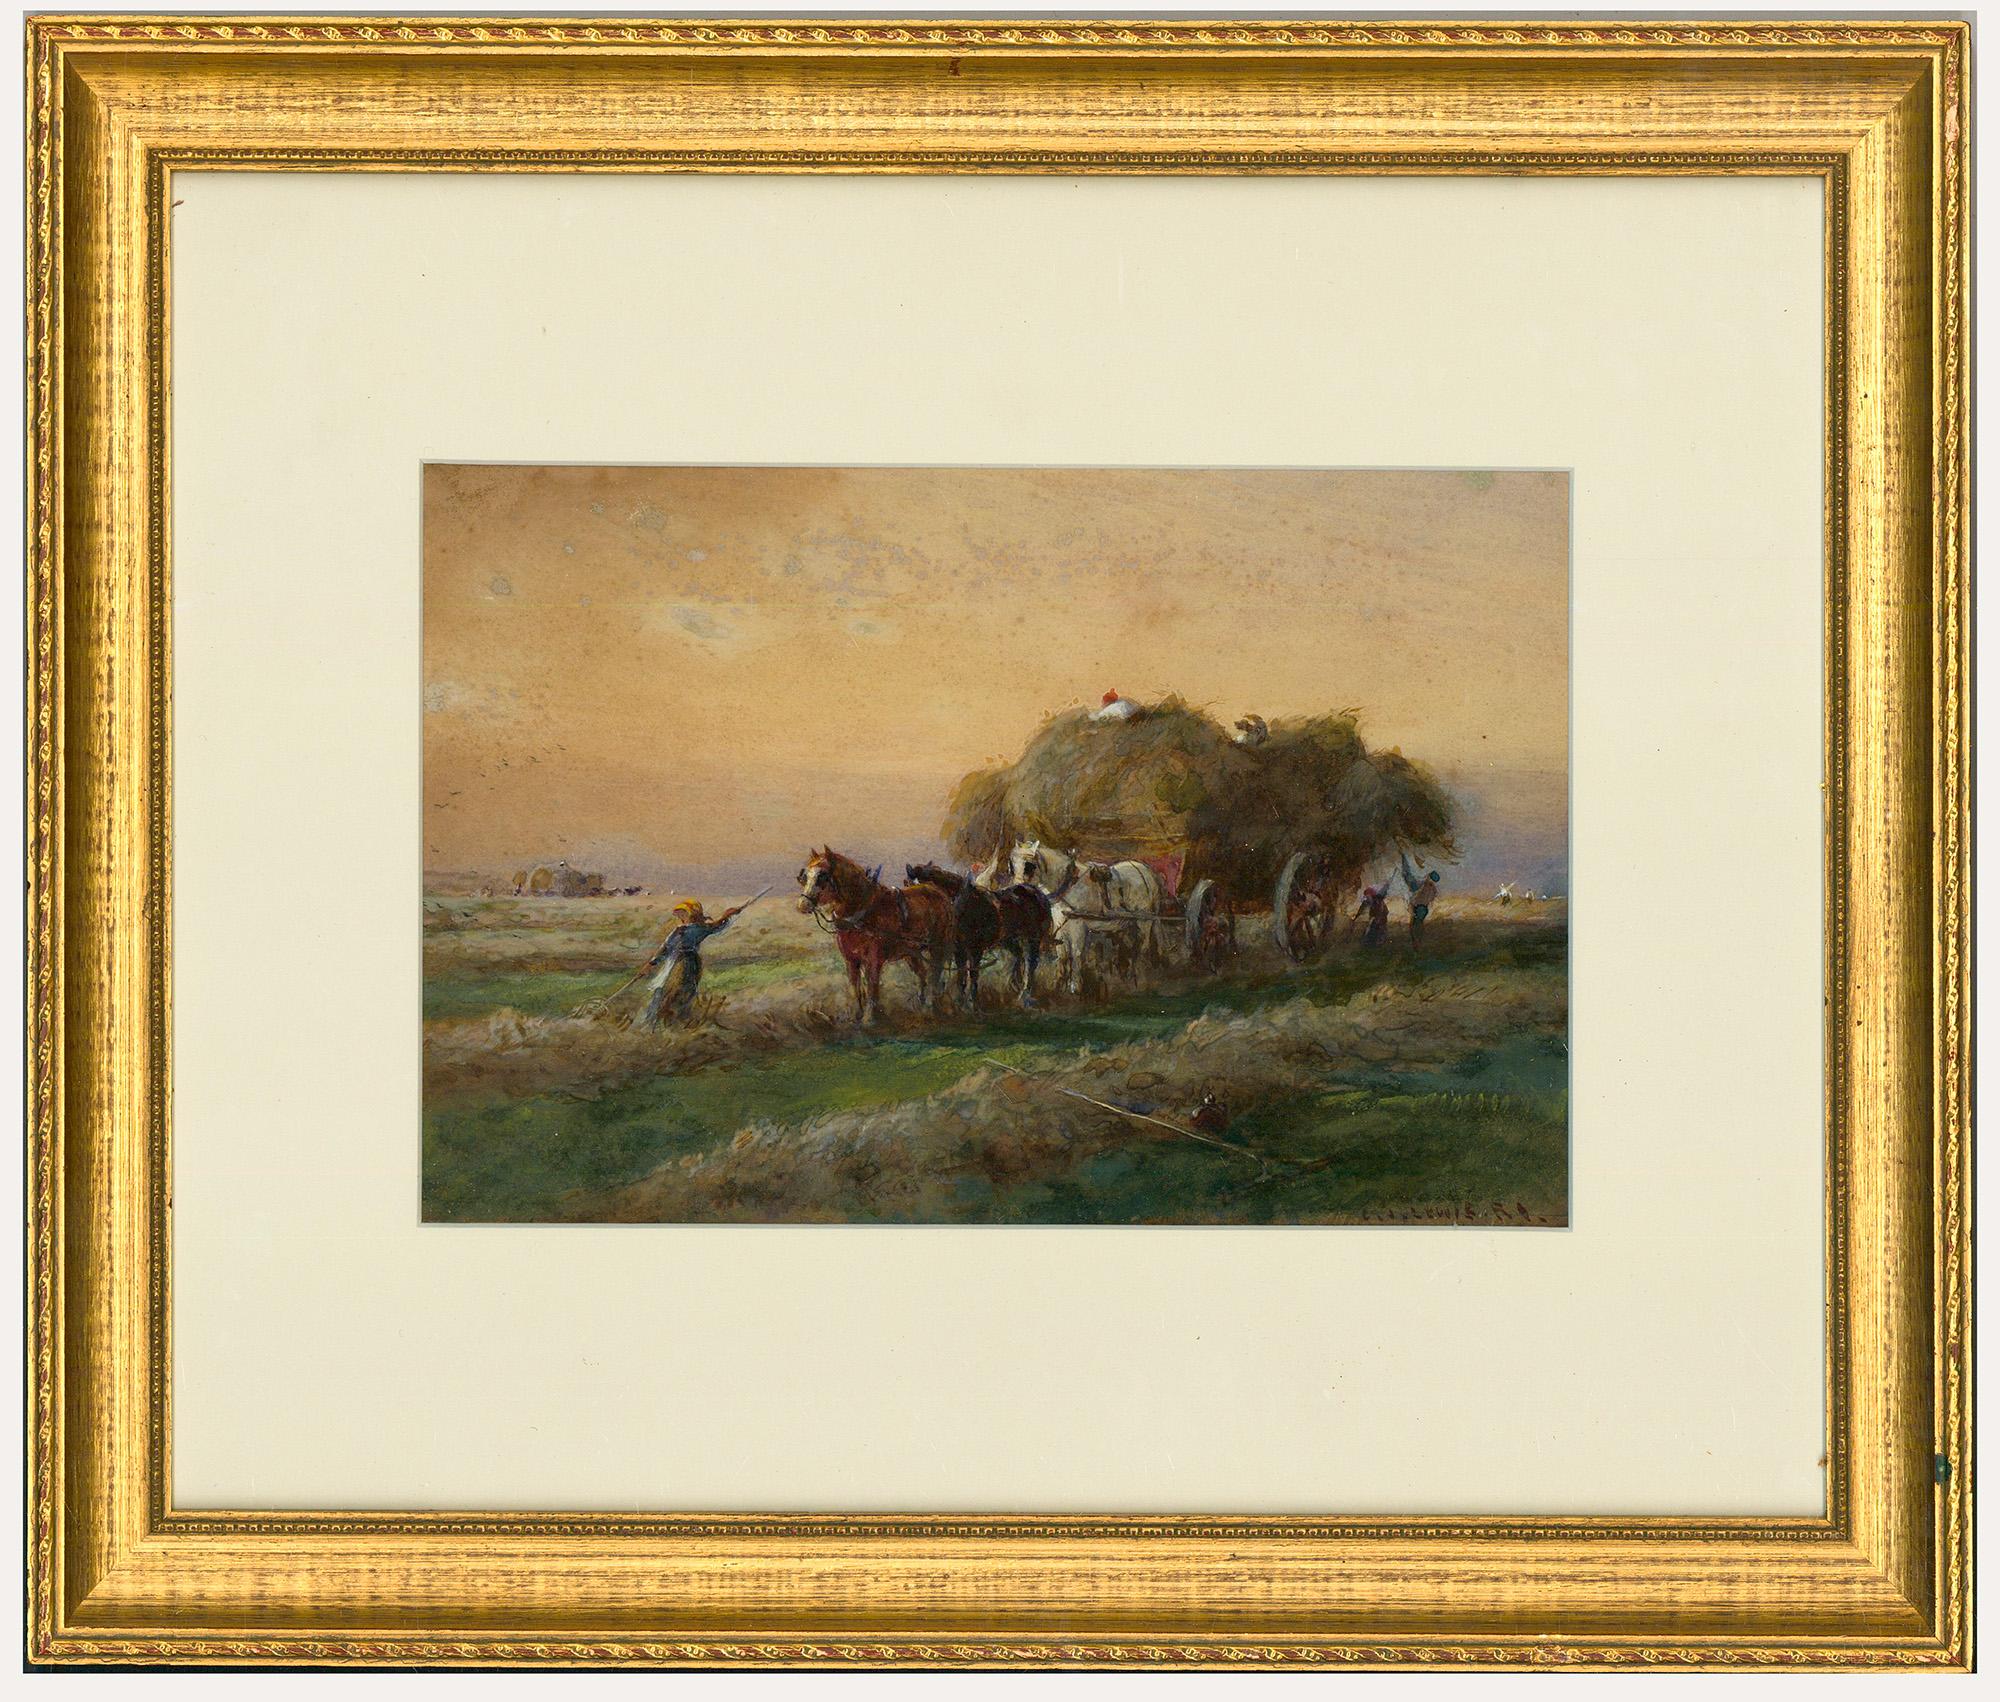 A delightful and dynamic watercolour scene by the artist Charles James Lewis, depicting figures forking hay in the fields. This labour intensive job required my hands at the time. The artist has depicted another group, repeating the same task